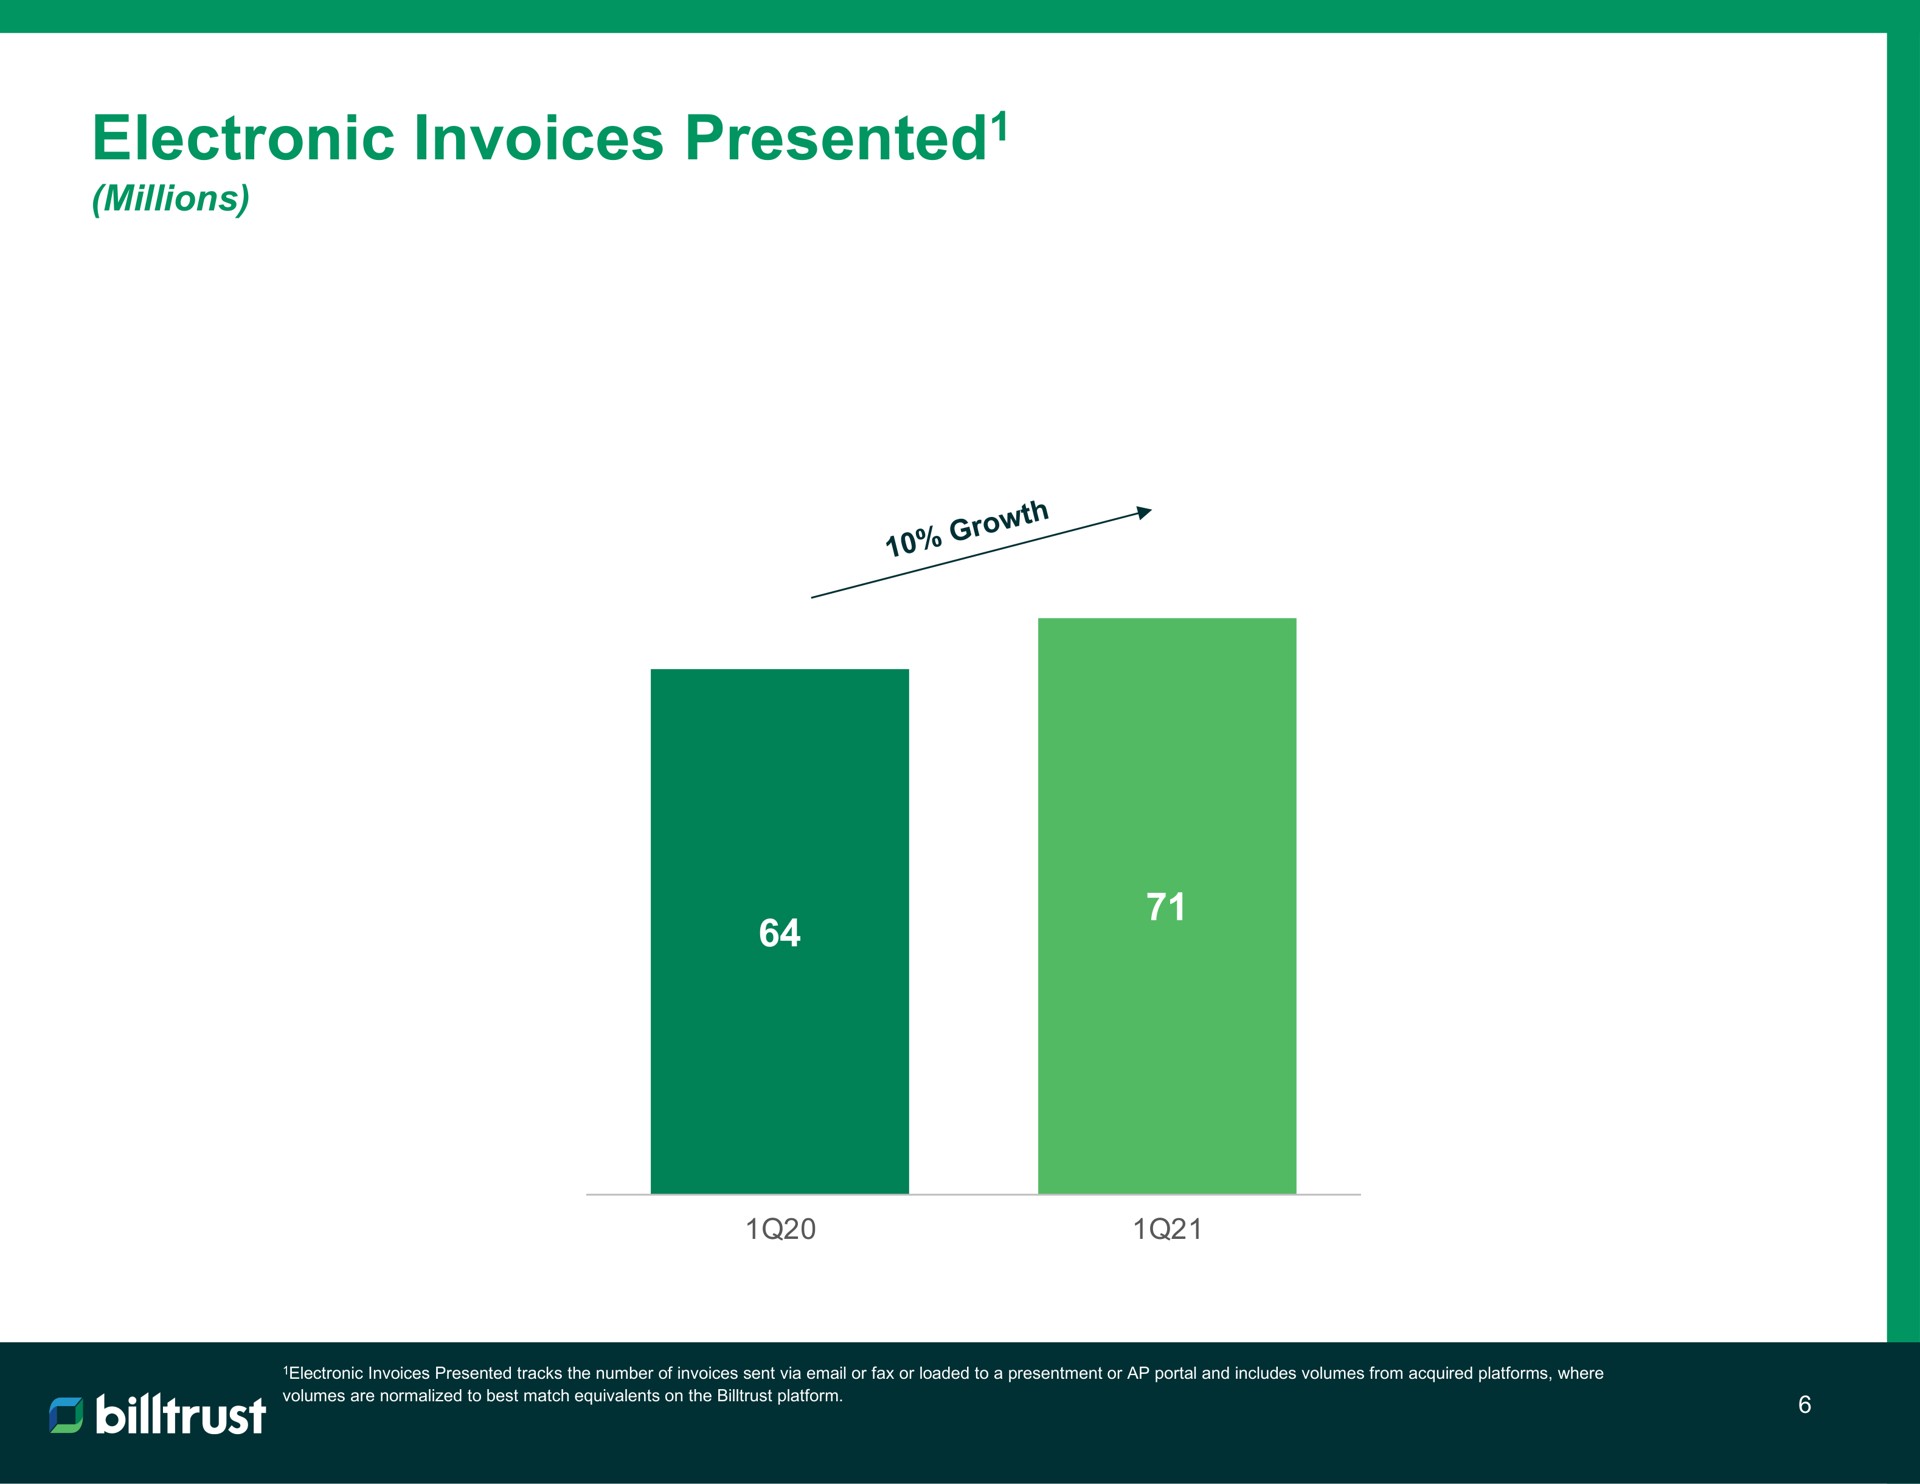 electronic invoices presented presented | Billtrust